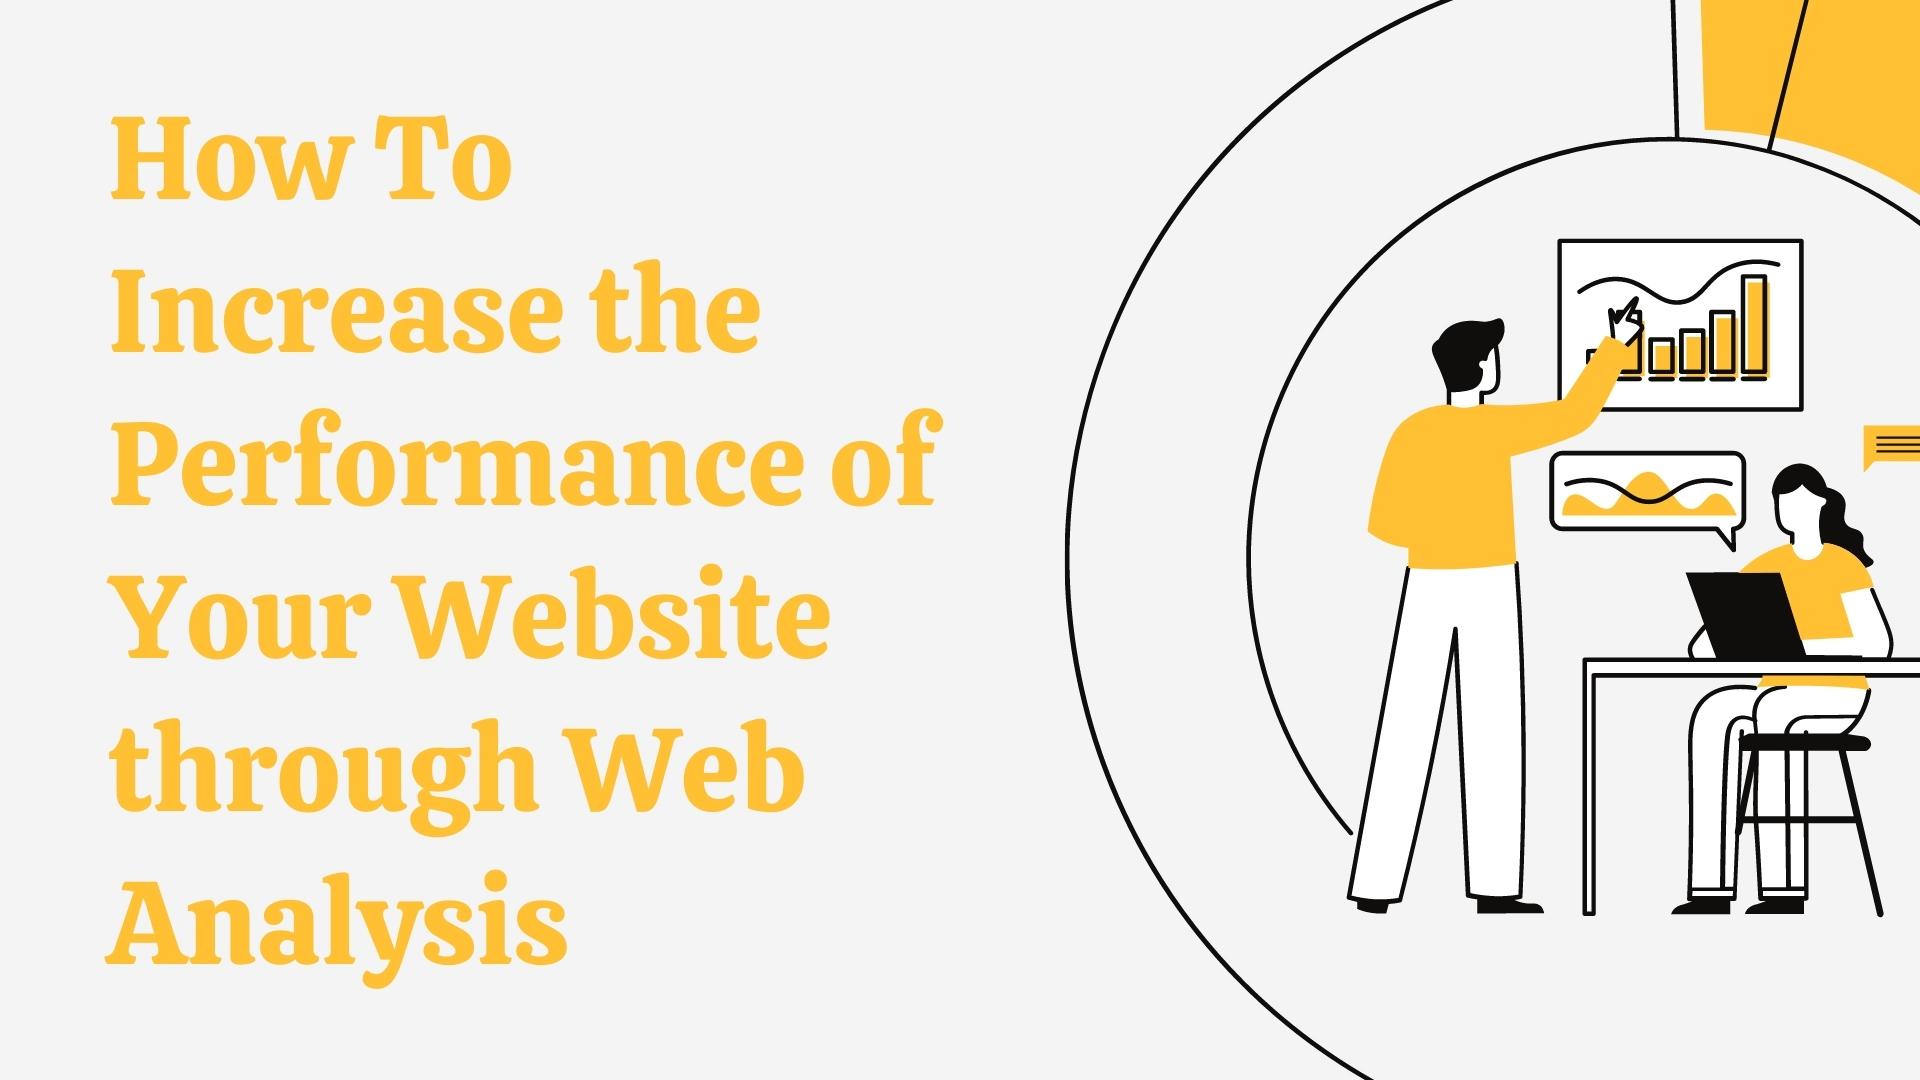 How To Increase the Performance of Your Website through Web Analysis